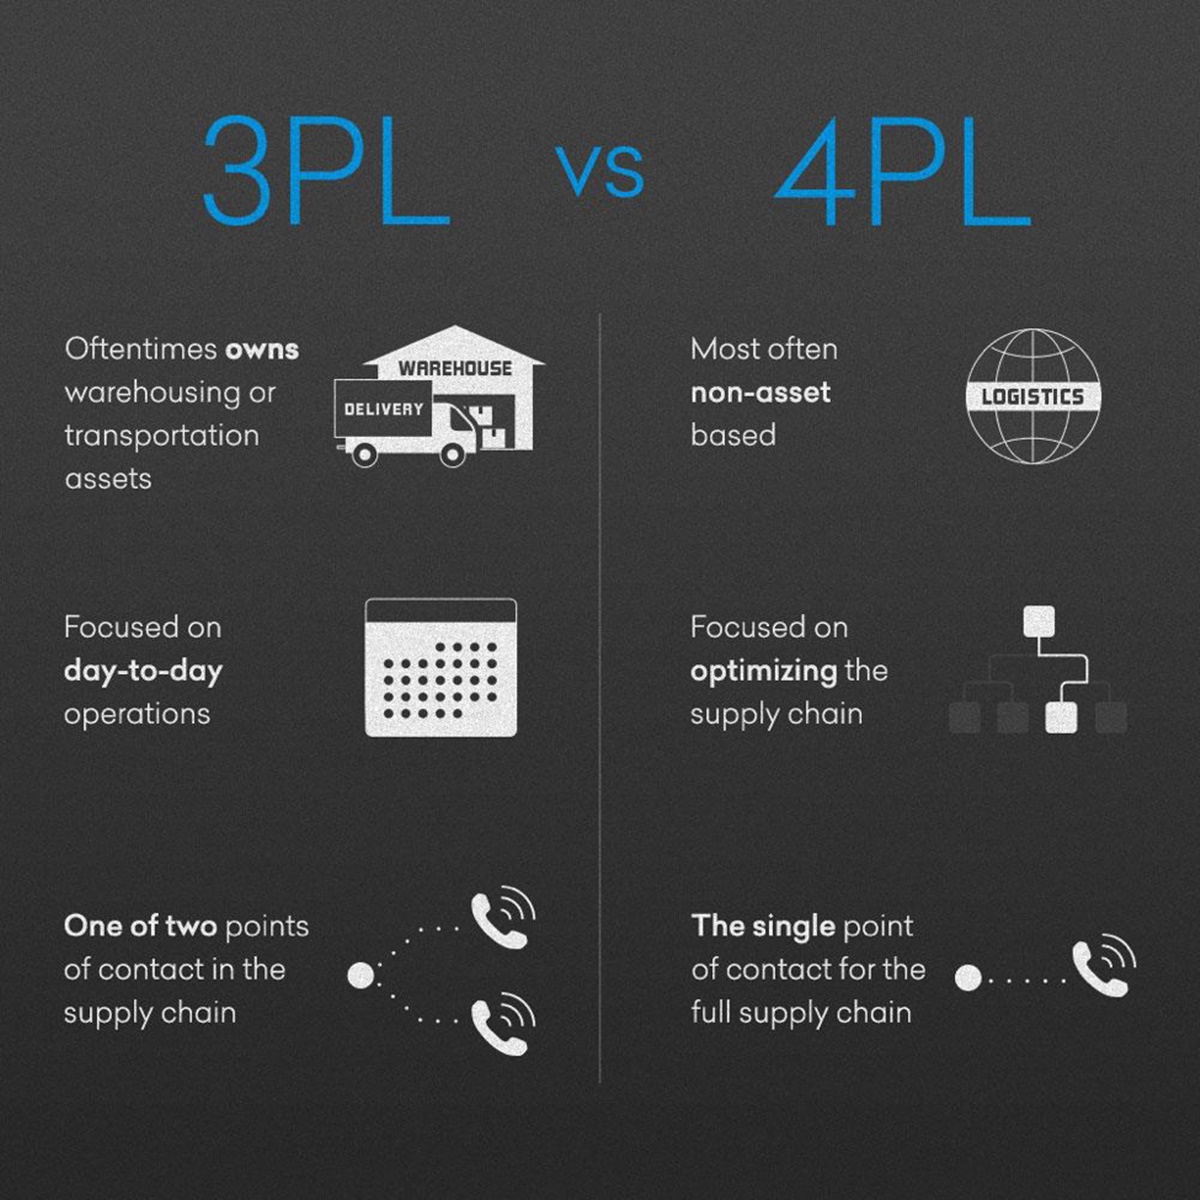 What are the differences between 3PL and 4PL?